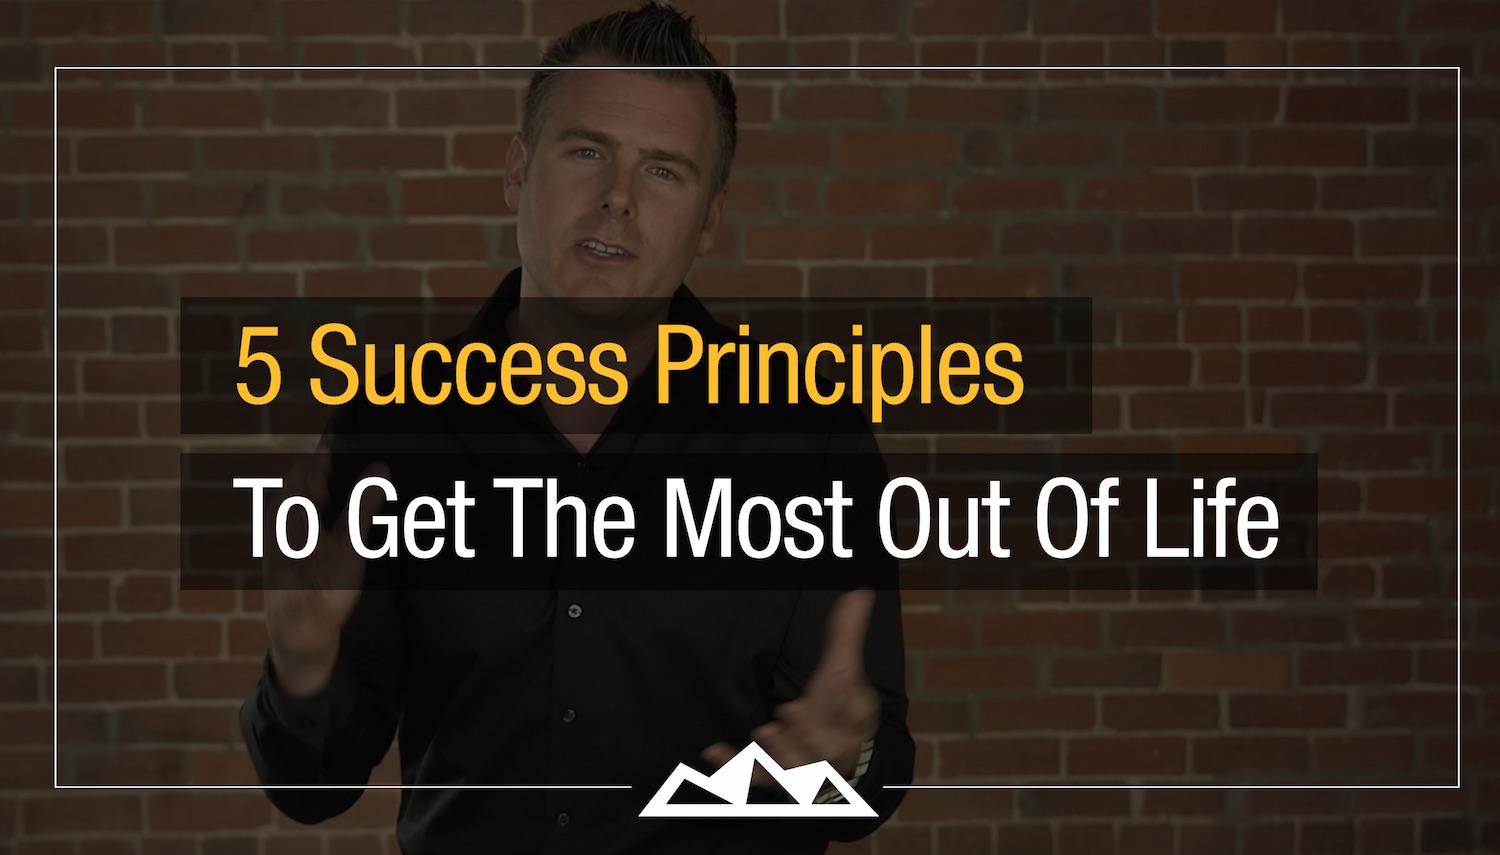 Proactive vs. Reactive: 5 Success Principles To Get The Most Out of Life